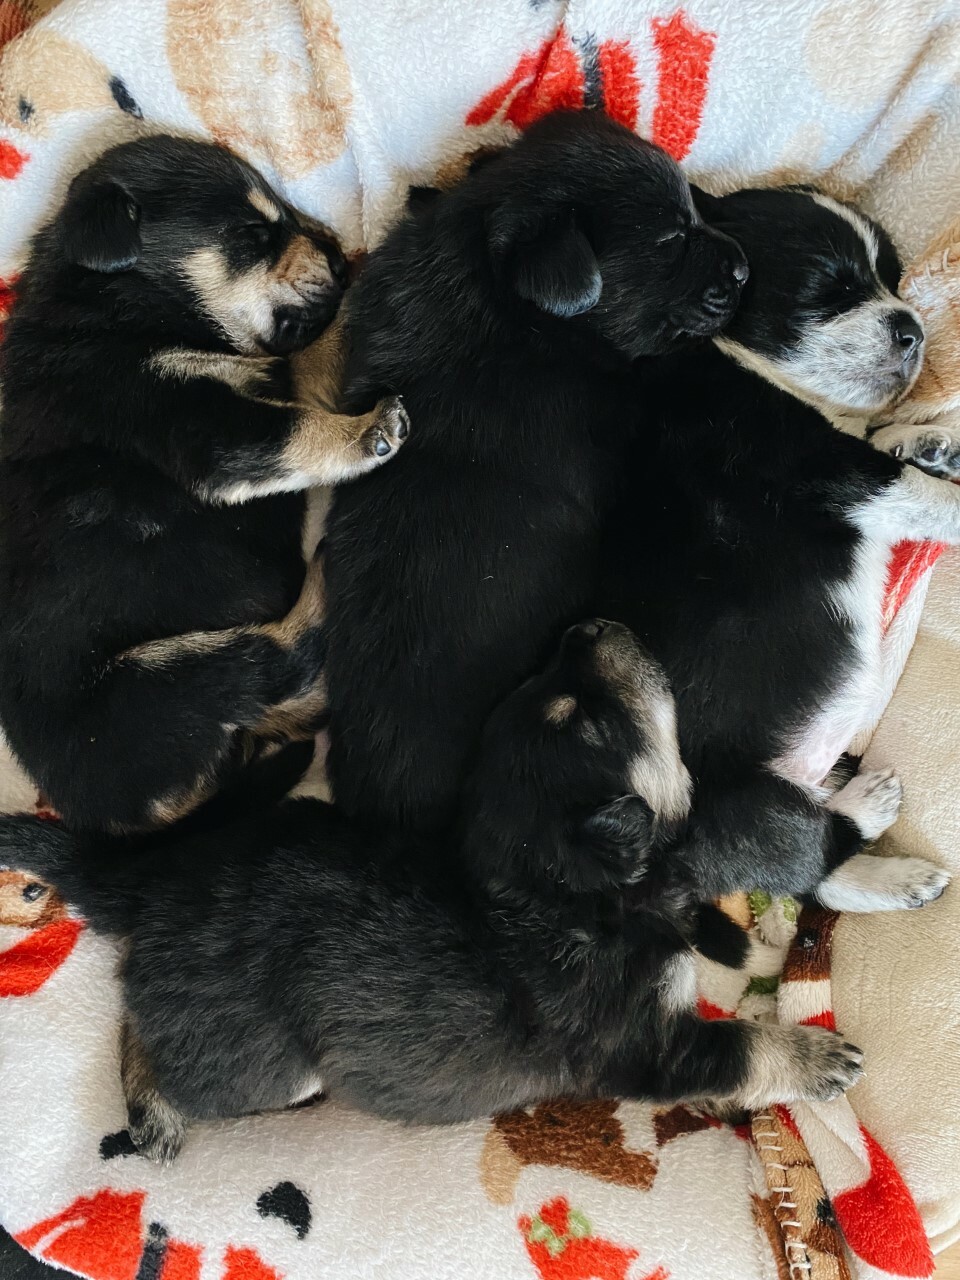 Nicole Chiuchiolo and Chris Murray helped foster these puppies and their mother, Lola.